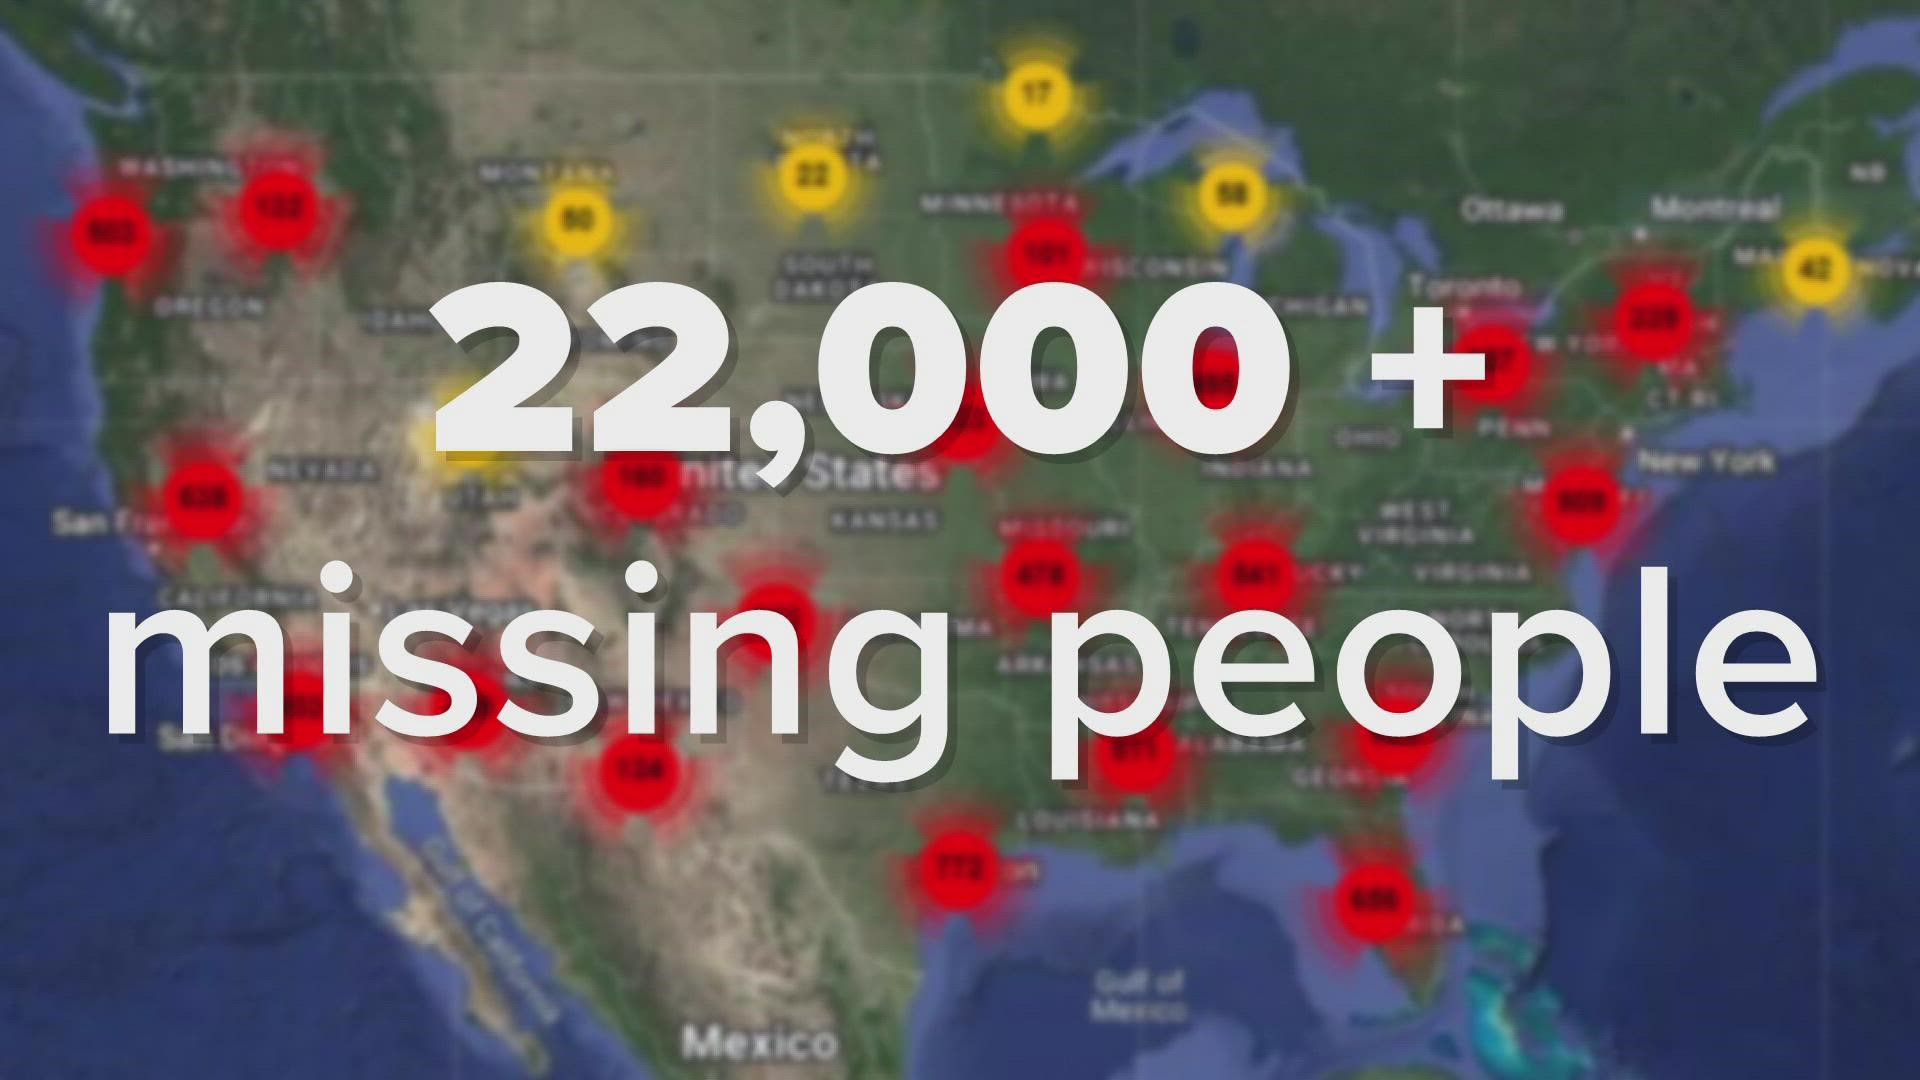 There are more than 22,000 people missing in the U.S. More than 600 of those people were reported missing in East Tennessee.